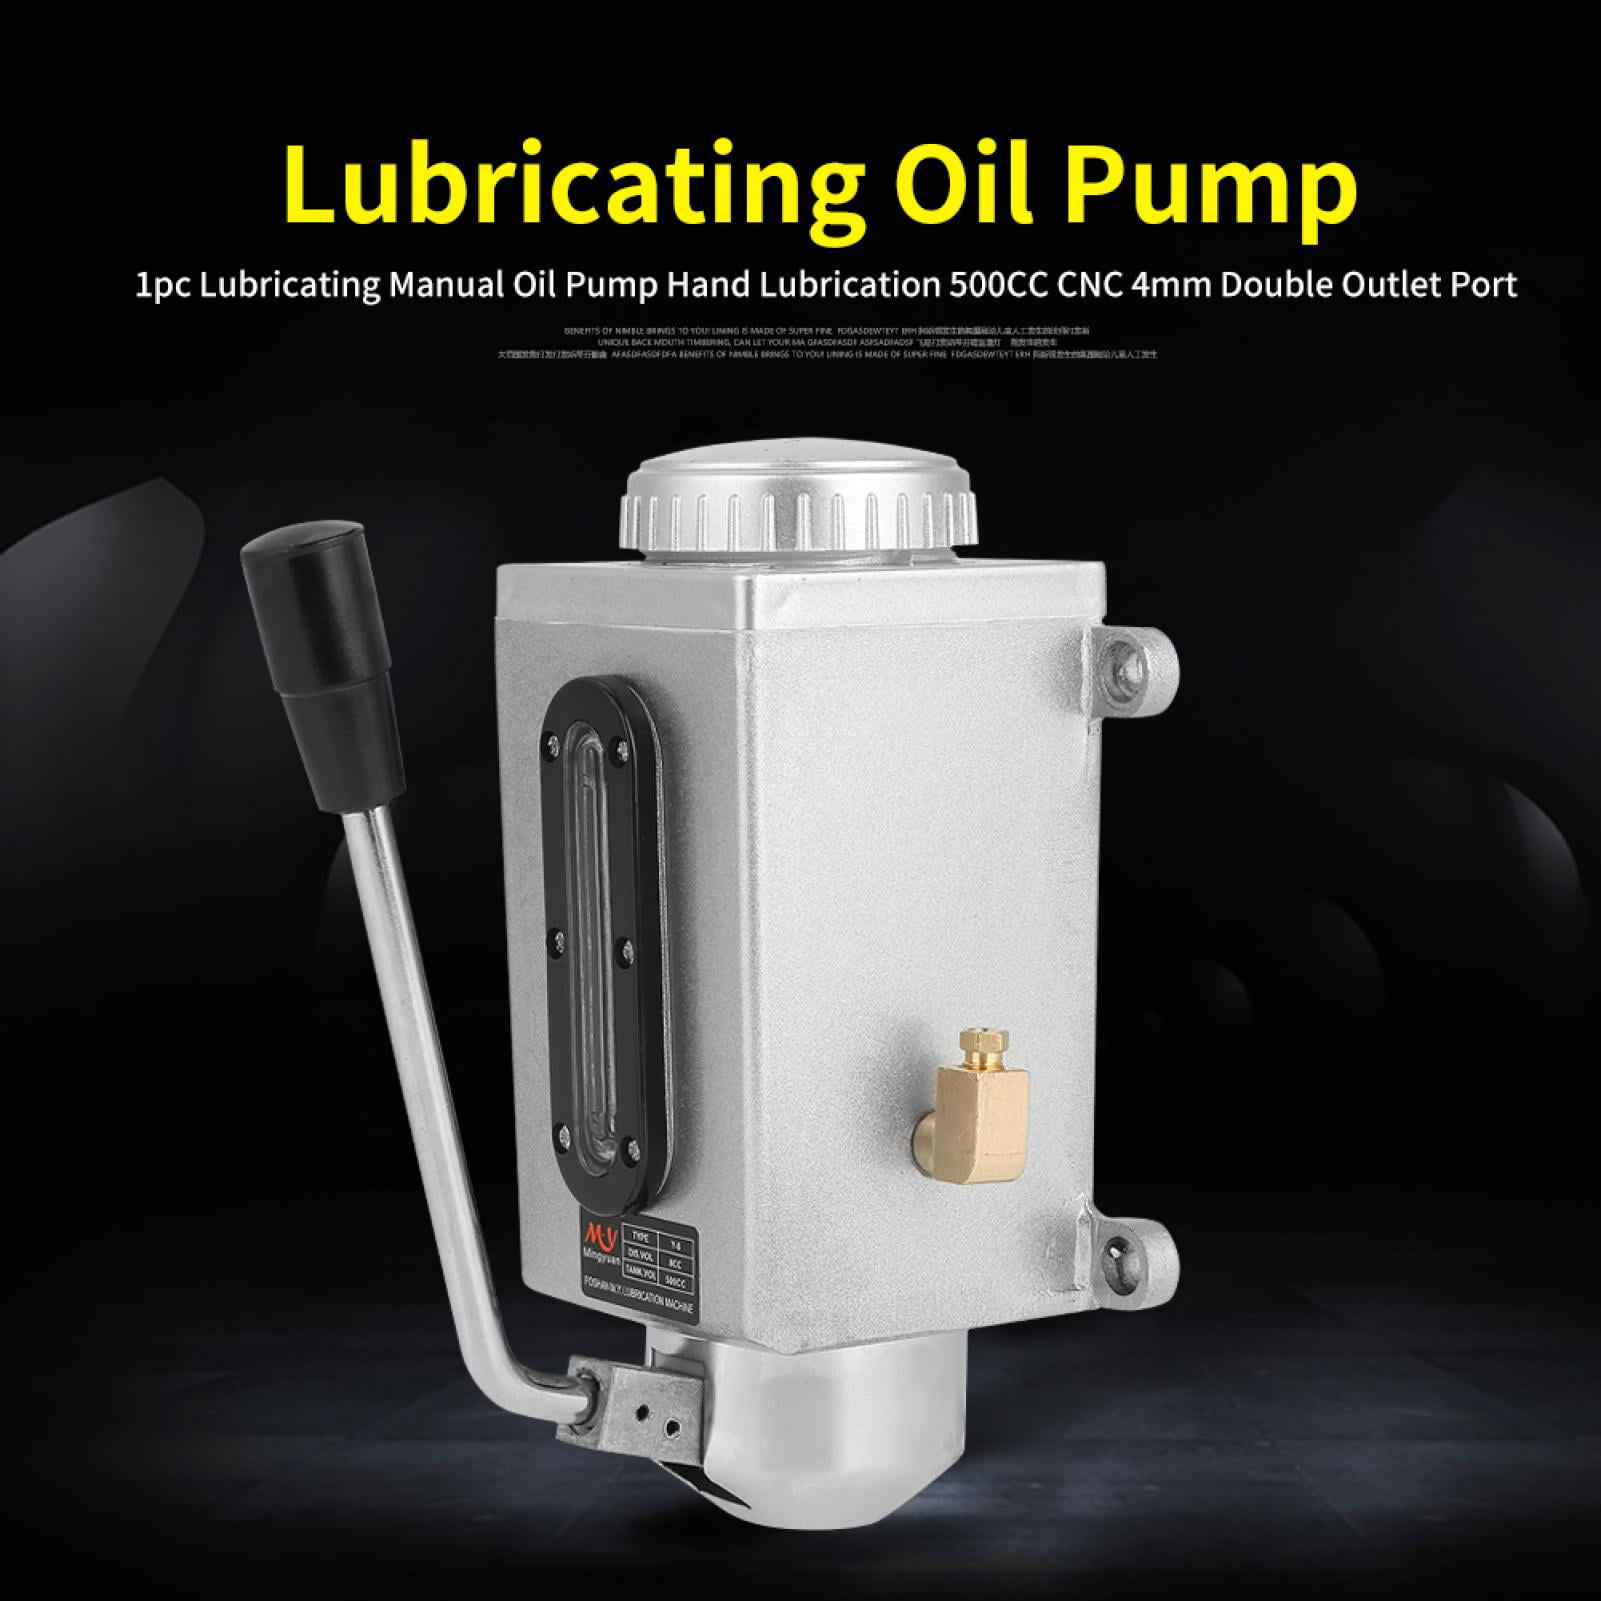 Cutting Machine Lathe Machine Manual Lubricating Pump Milling Machine 500CC CNC Lubricating Manual Oil Pump Hand Lubrication Widely Used in Punching Machine 